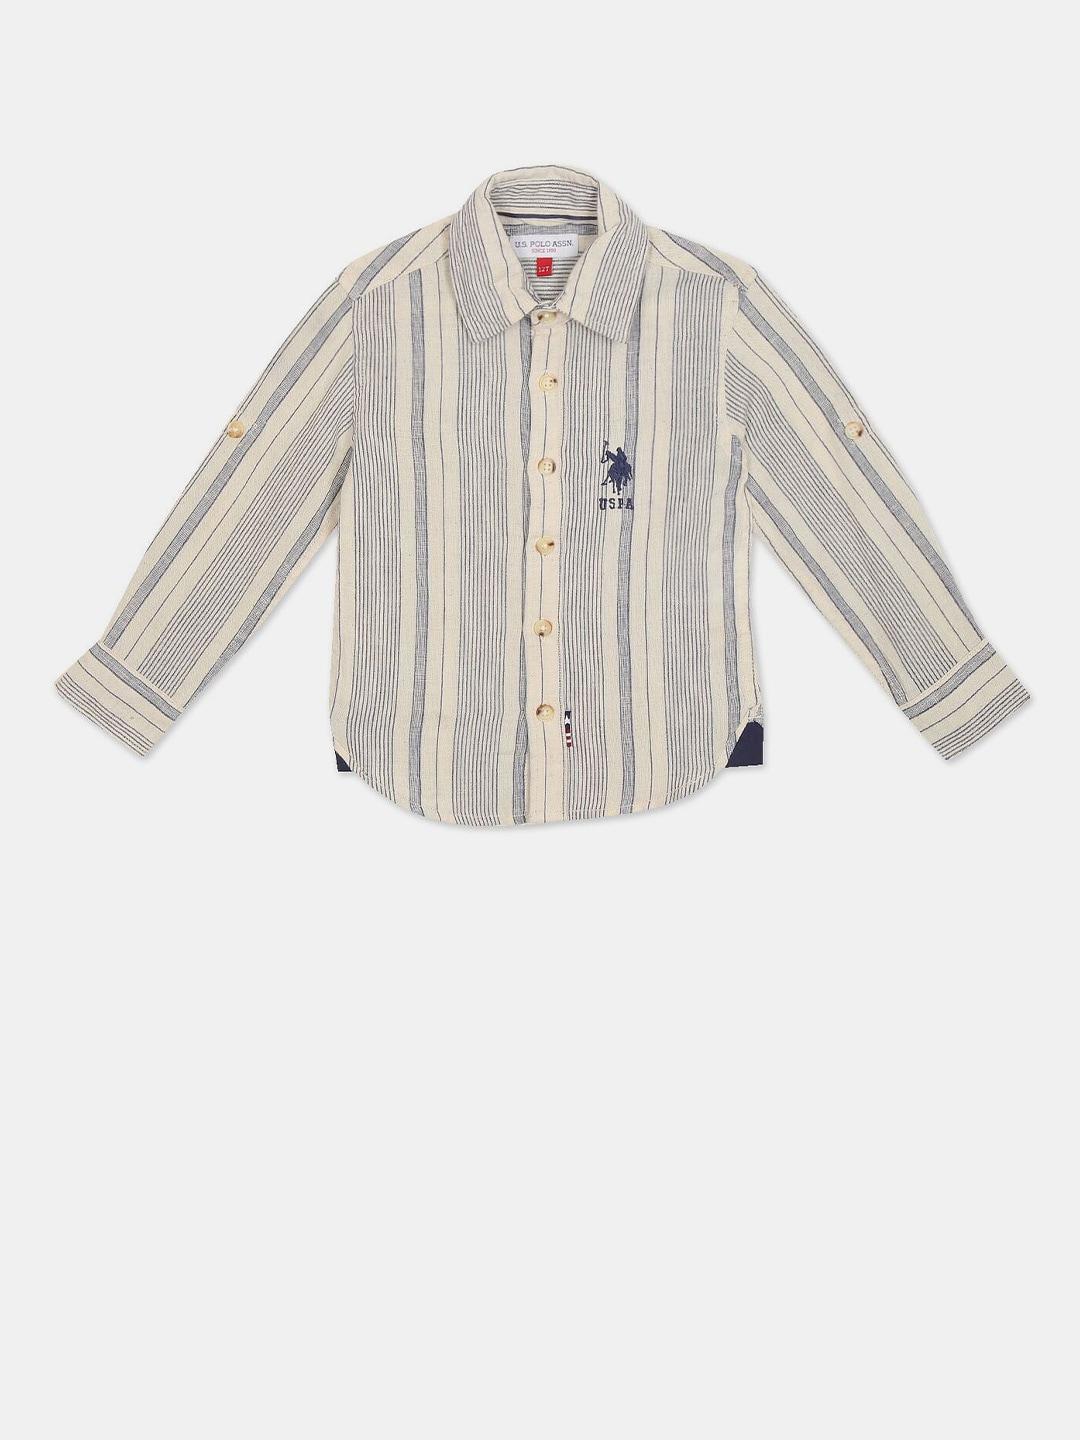 U.S. Polo Assn. Boys Off White and Blue Striped Casual Shirt